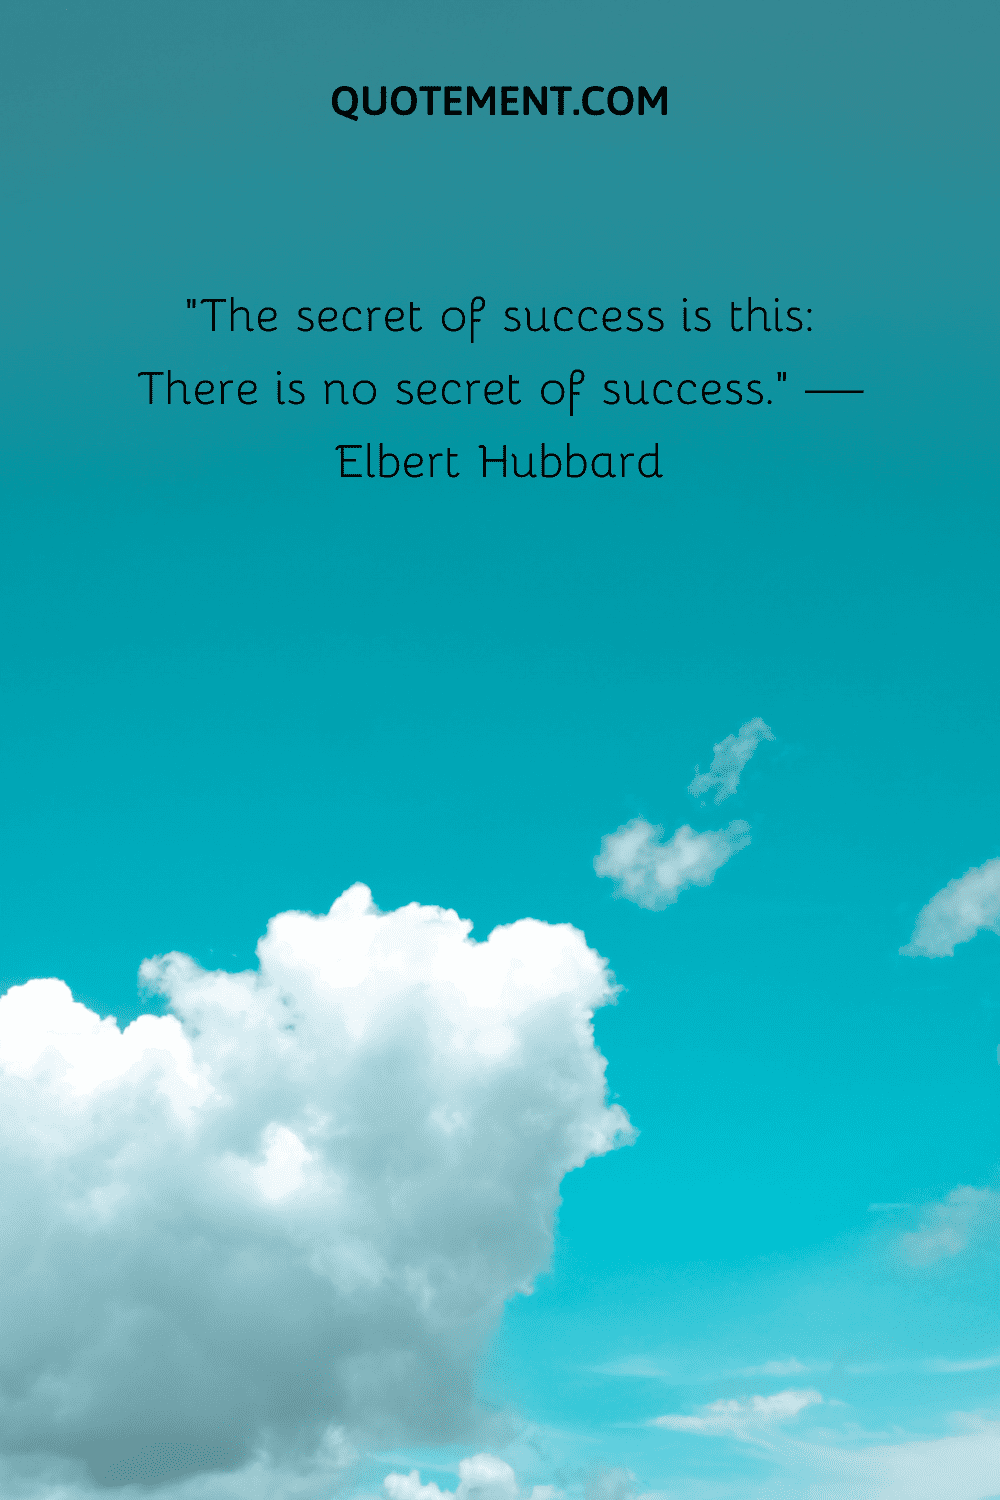 There is no secret of success